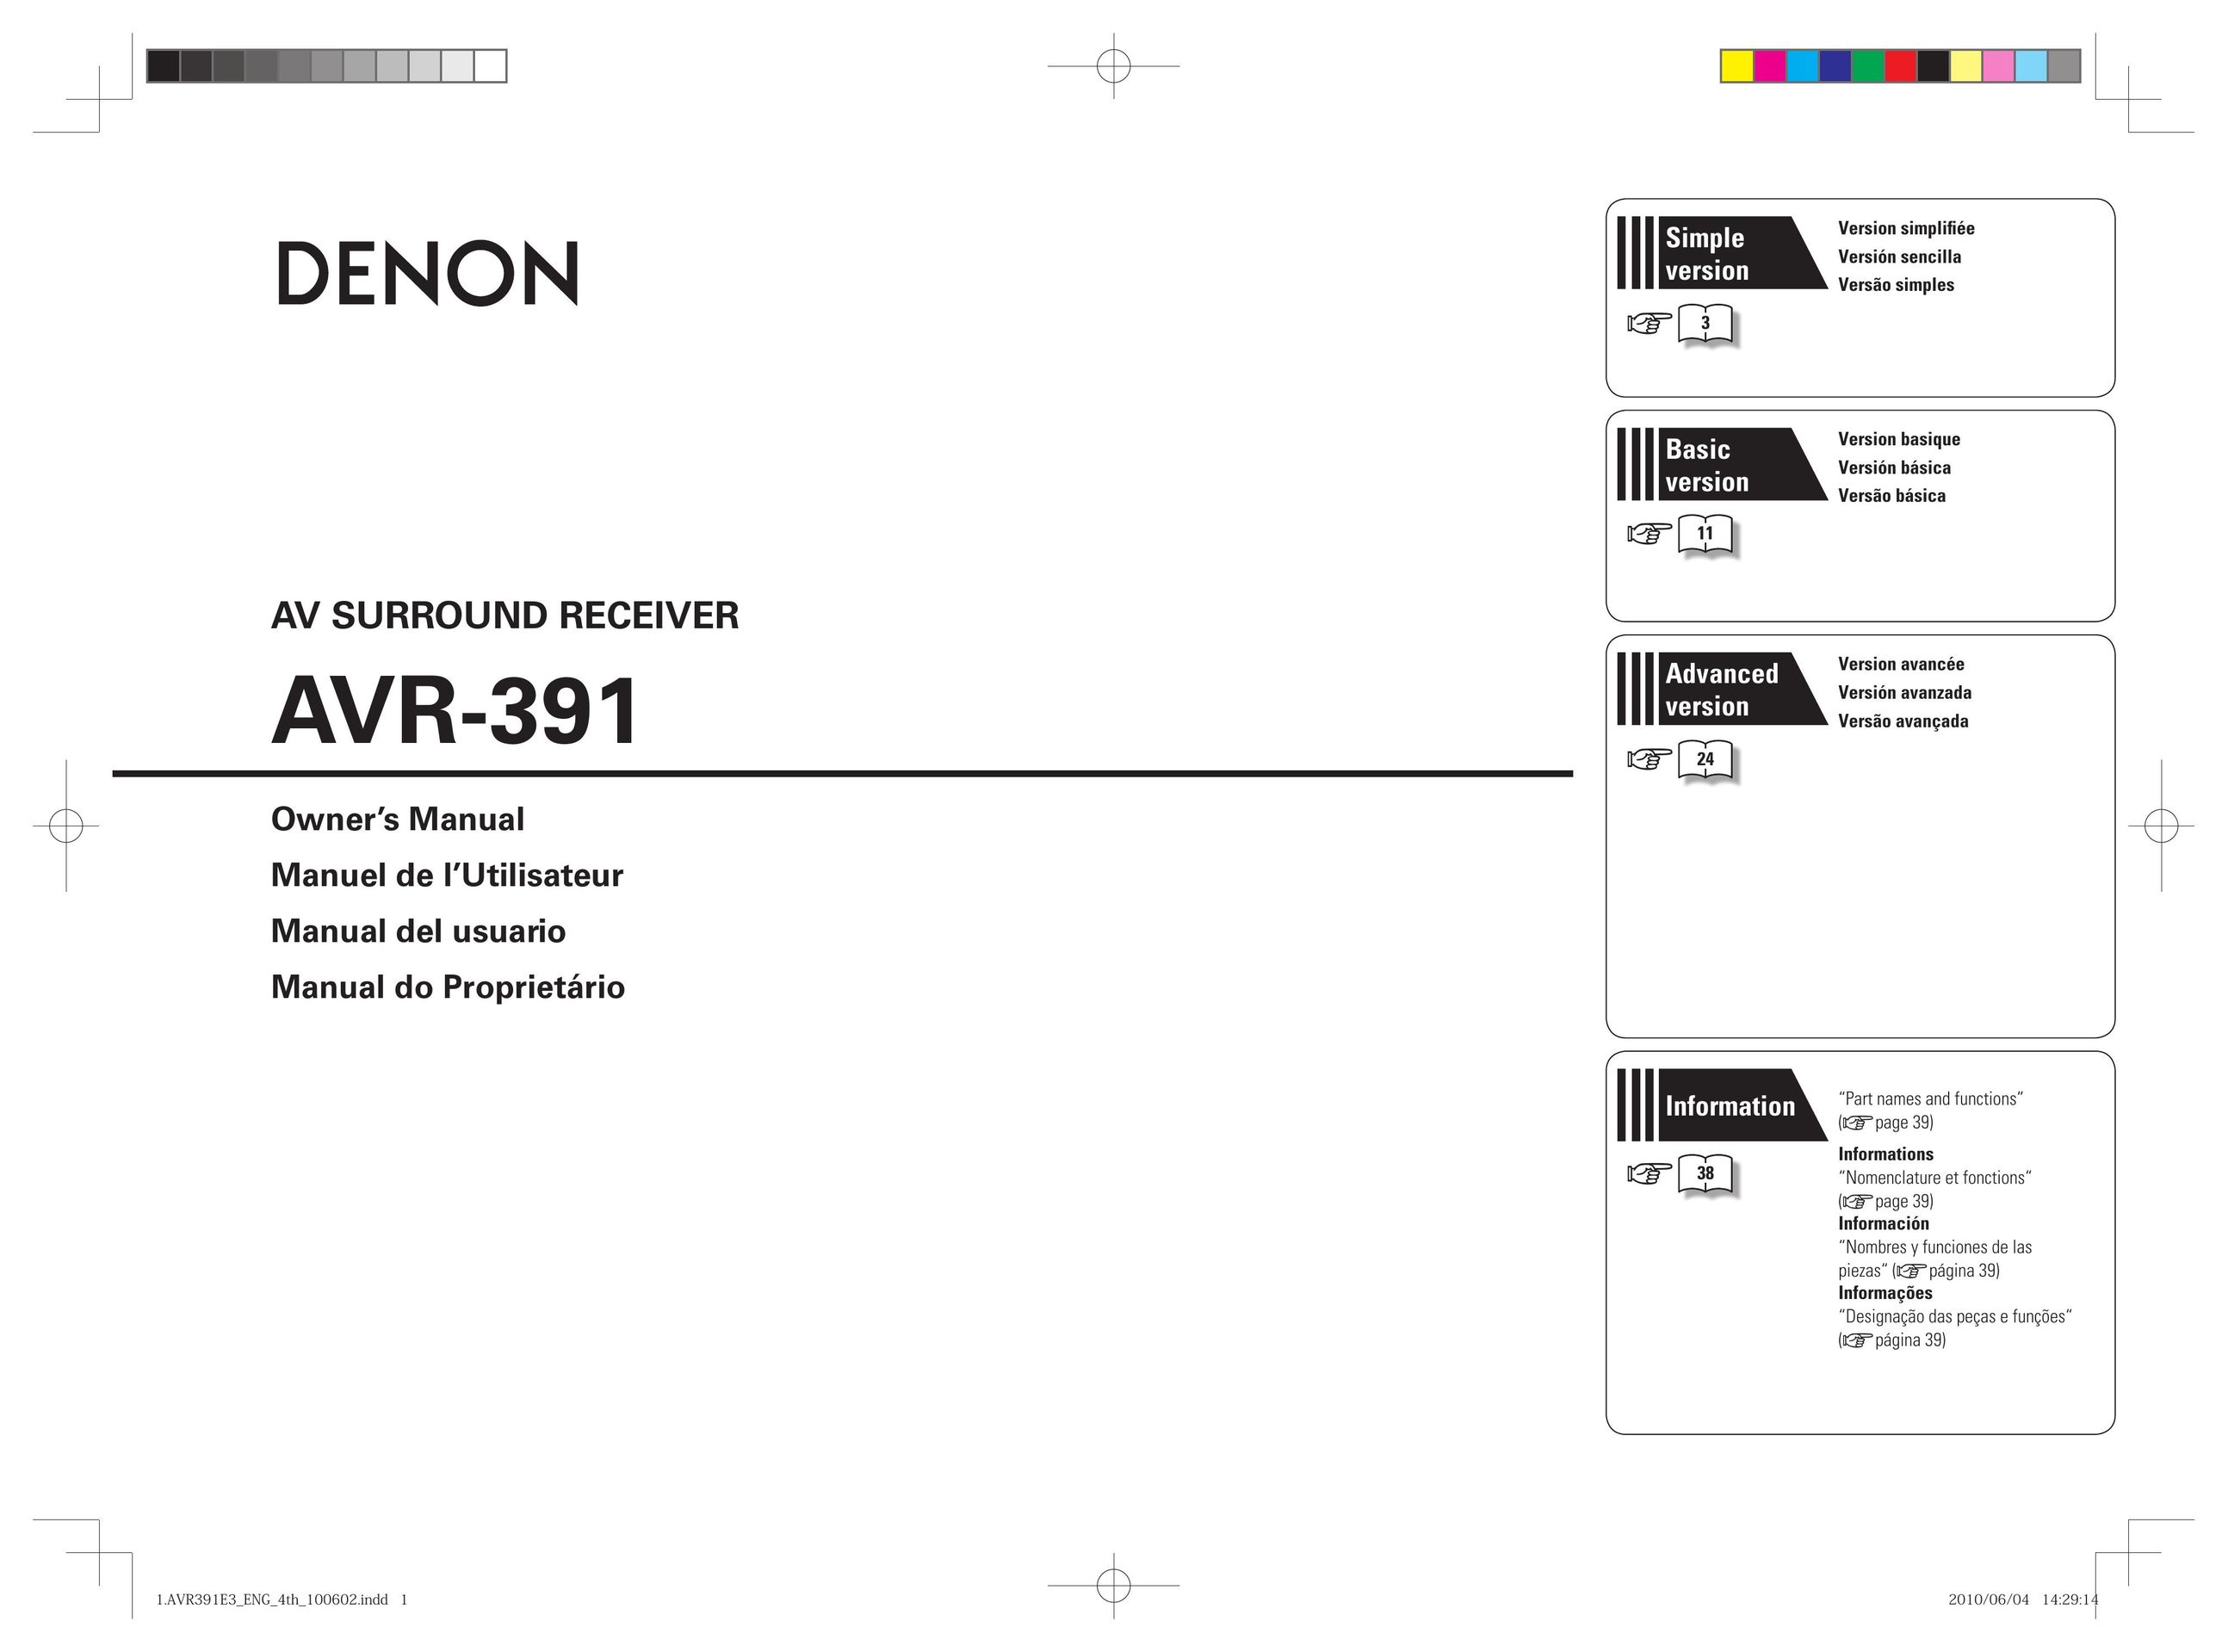 Denon AVR-391 Home Theater System User Manual